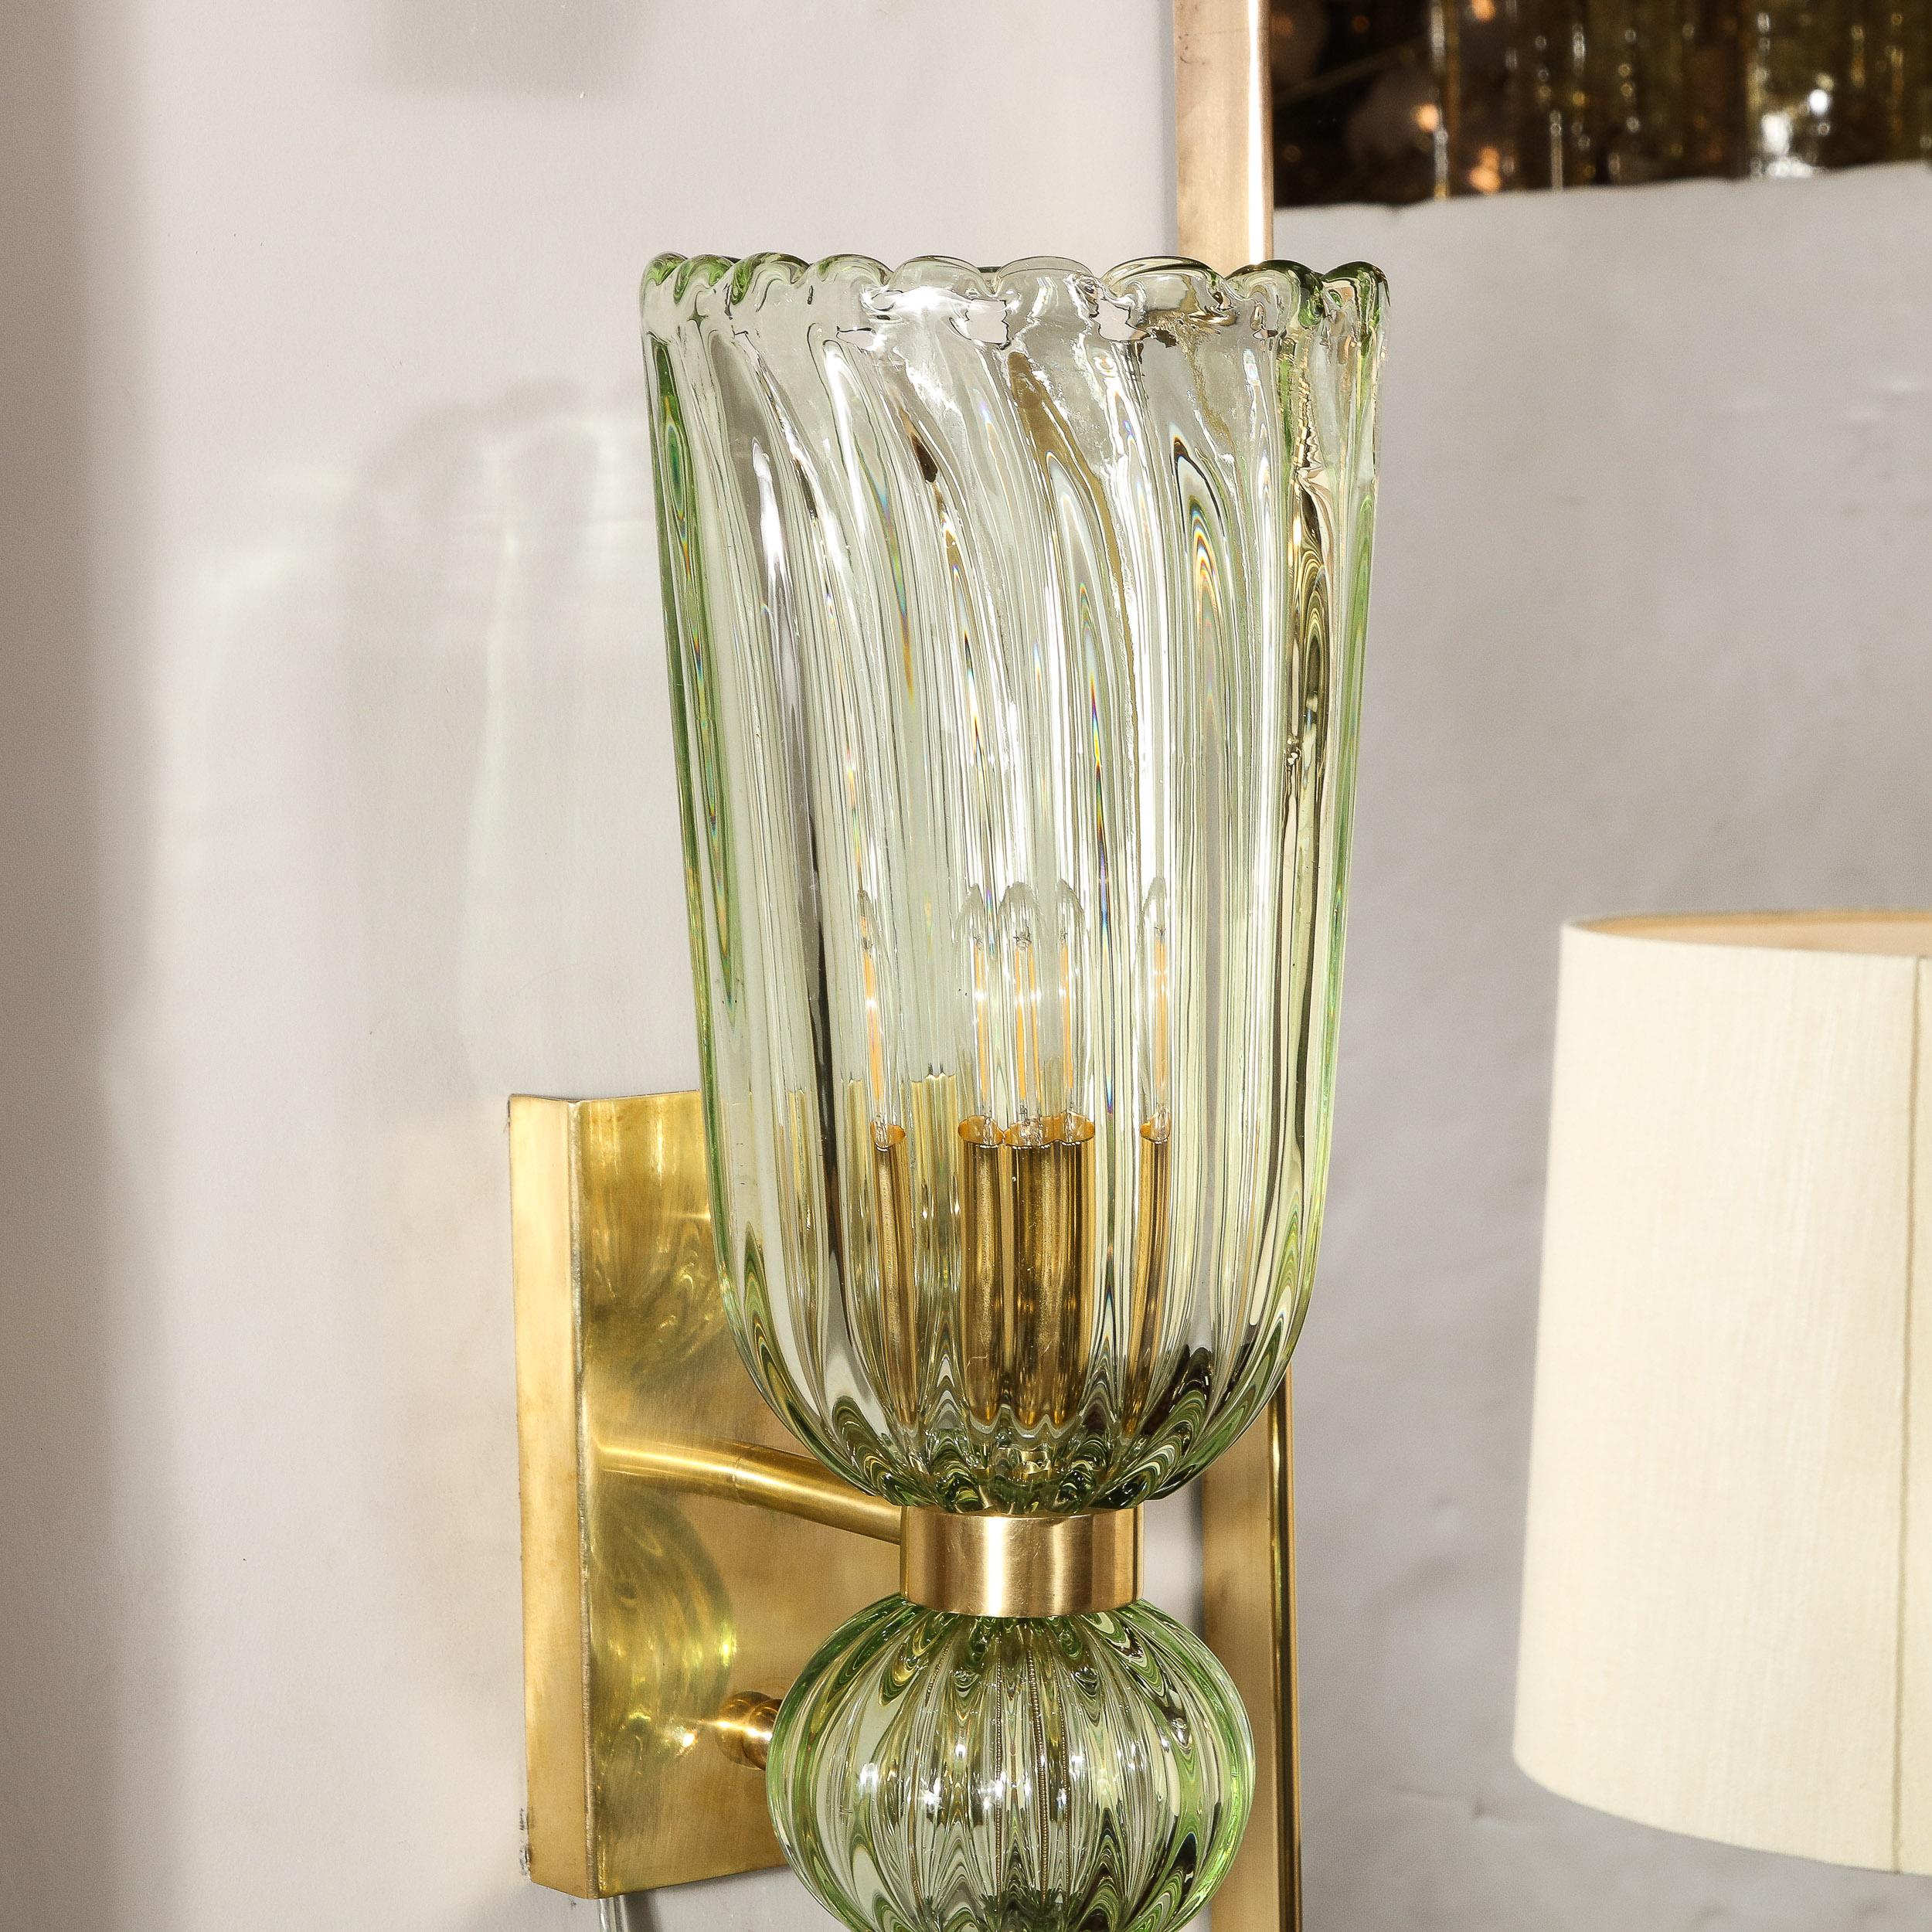 This elegantly reserved pair of sconces originates from Italy during the 21st century. Composed in a stunning celadon hue of semi-translucent handblown Murano glass, diffusing light and adding brilliant complexity of value across the vertically